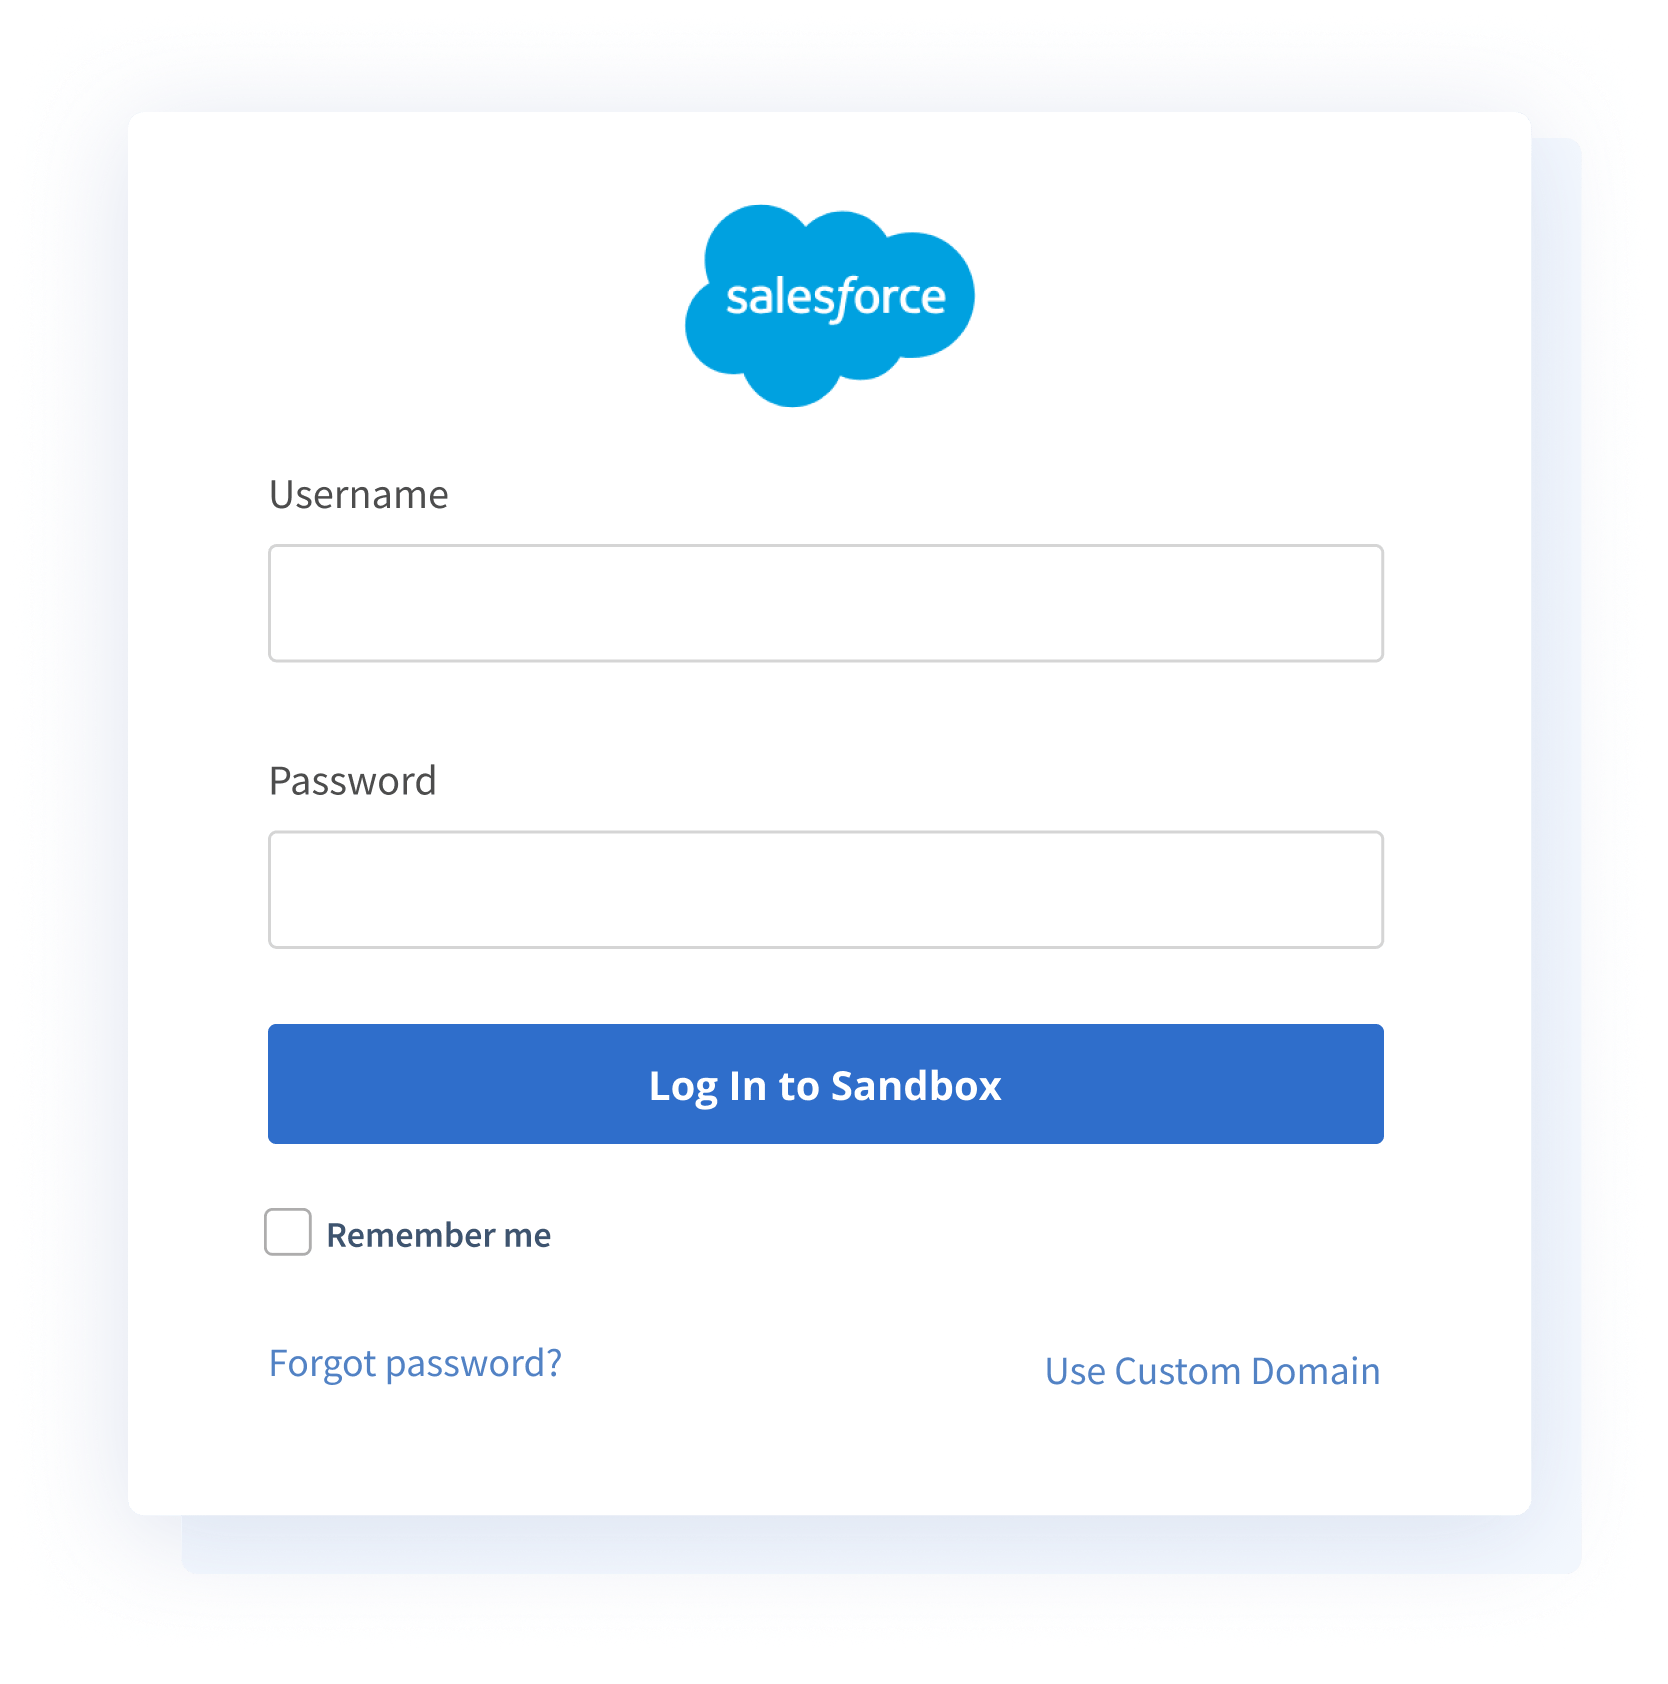 Allow Donorbox on Salesforce